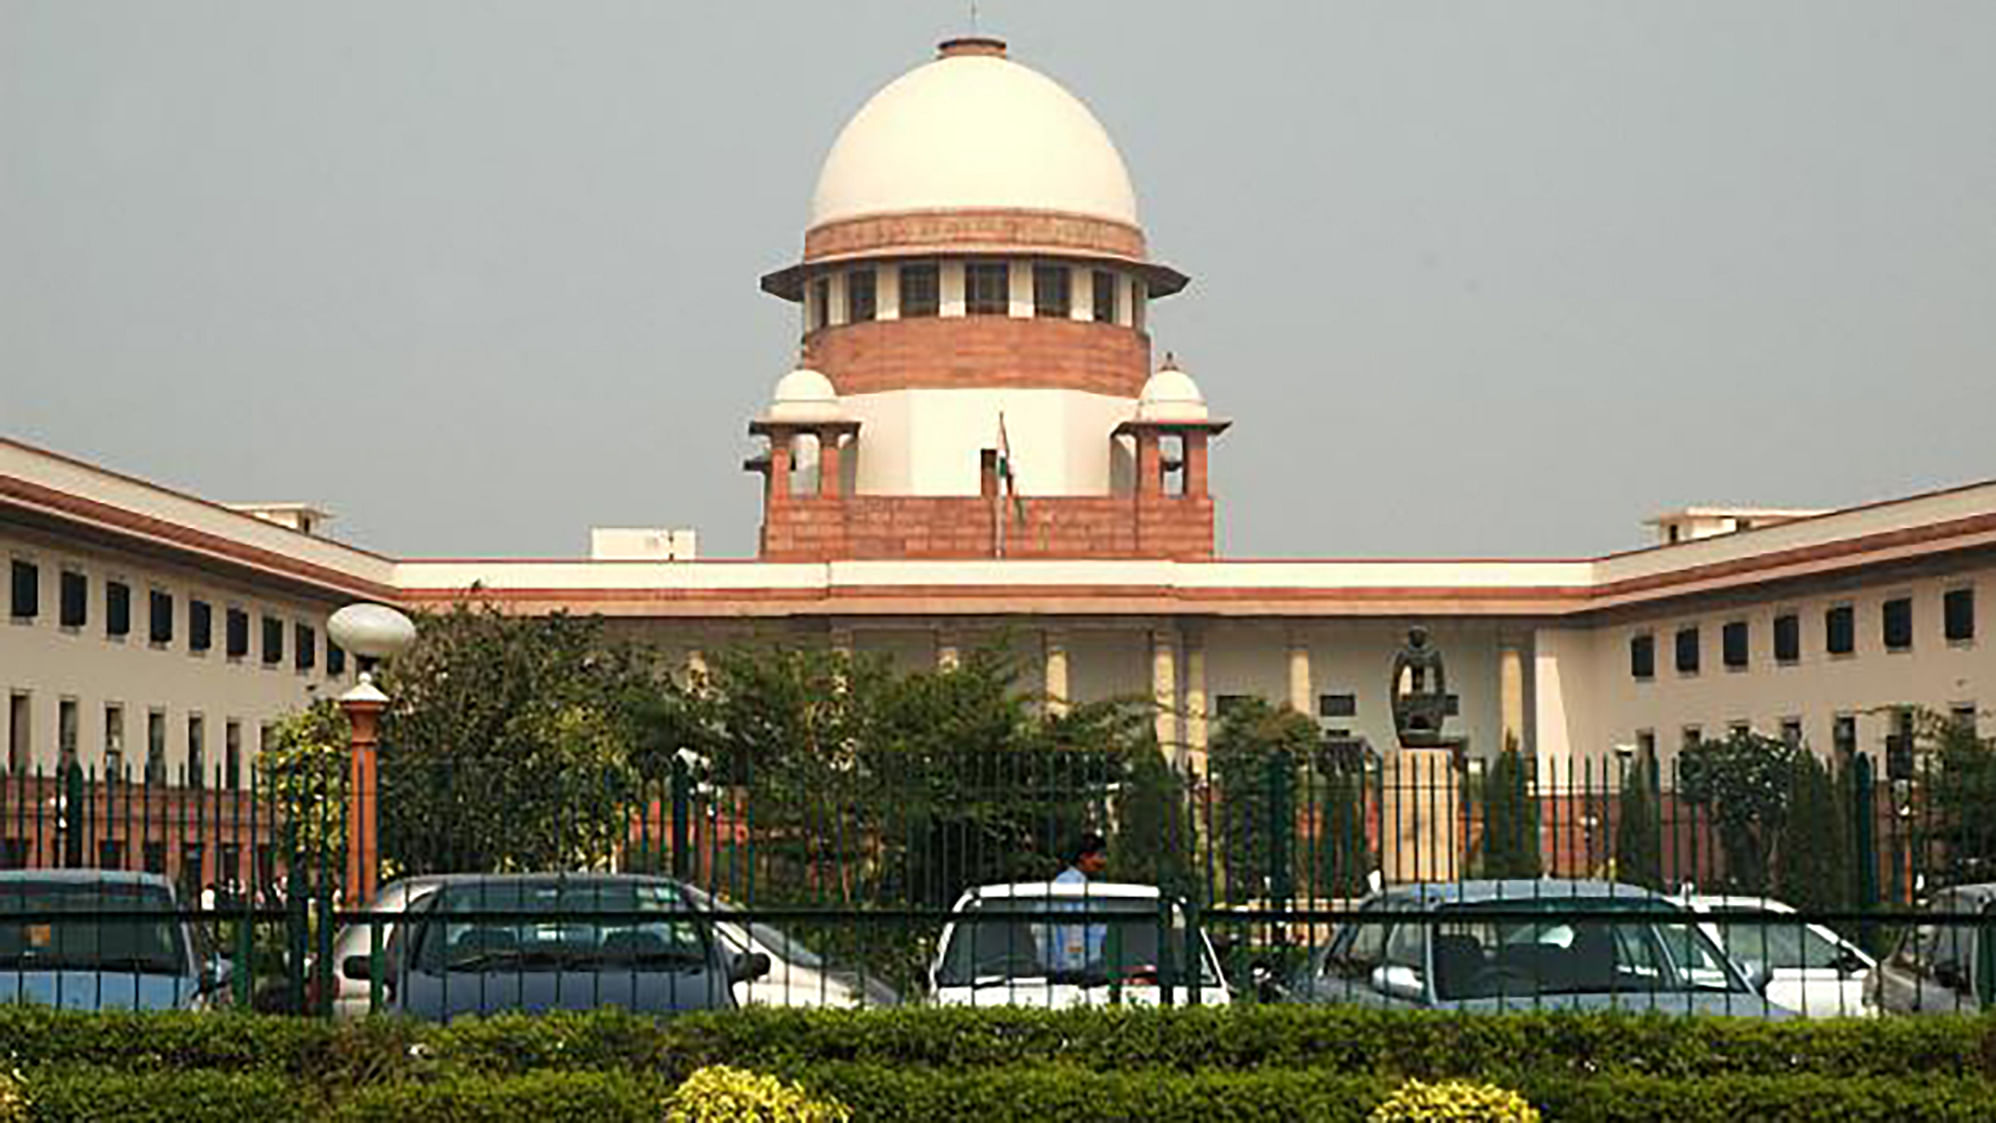 <div class="paragraphs"><p>The Supreme Court on Thursday, 10 February, directed the Madhya Pradesh (MP) High Court to reinstate a former woman judicial judge, who had resigned in 2014 after raising sexual harassment allegations against a then MP High Court judge.</p></div>